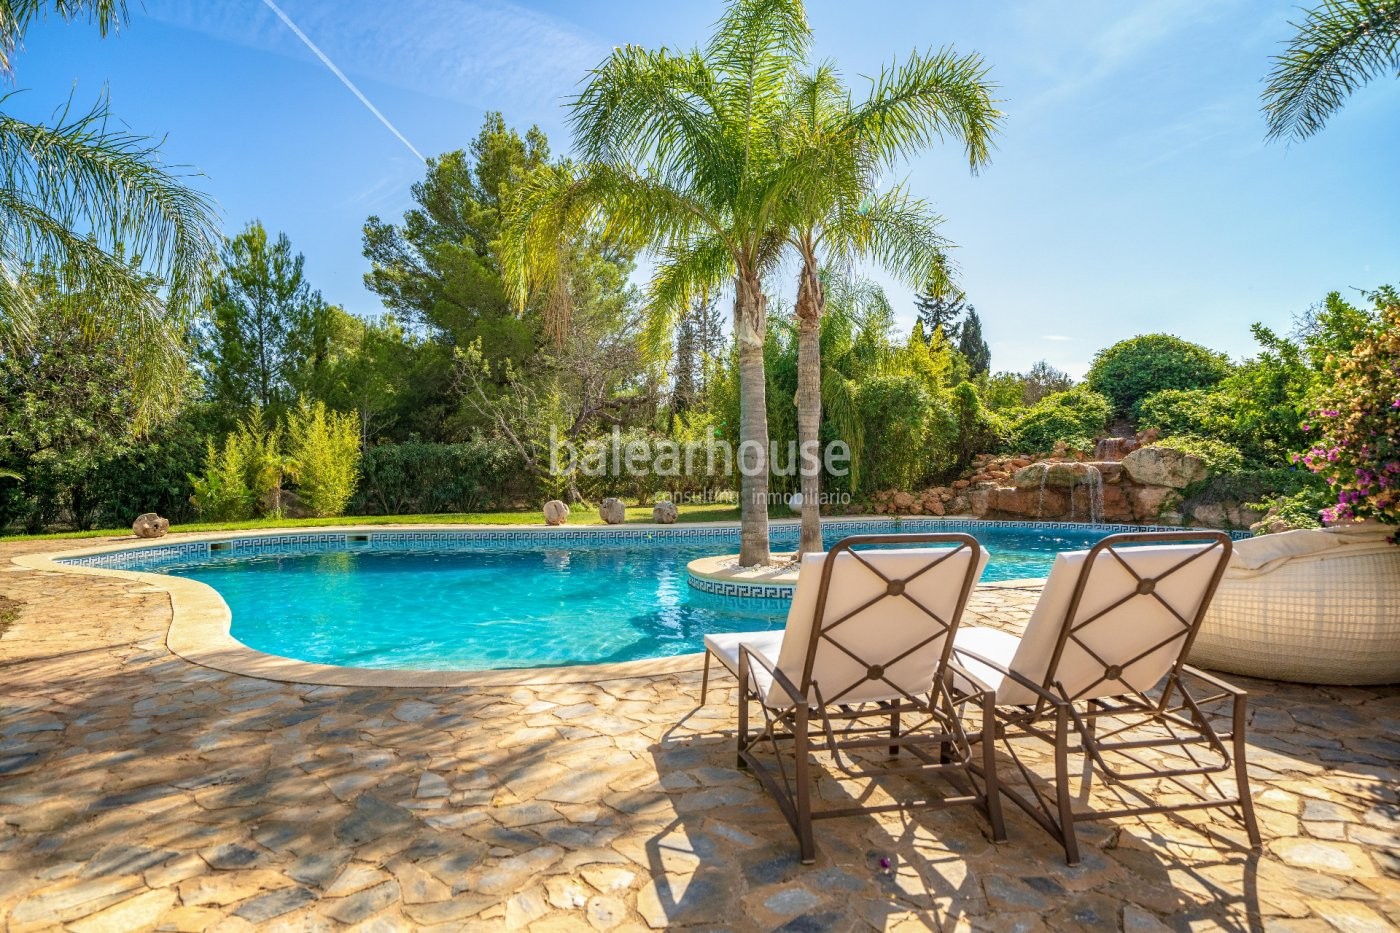 Excellent rustic finca with large garden and swimming pool at the foot of the Tramuntana mountains.